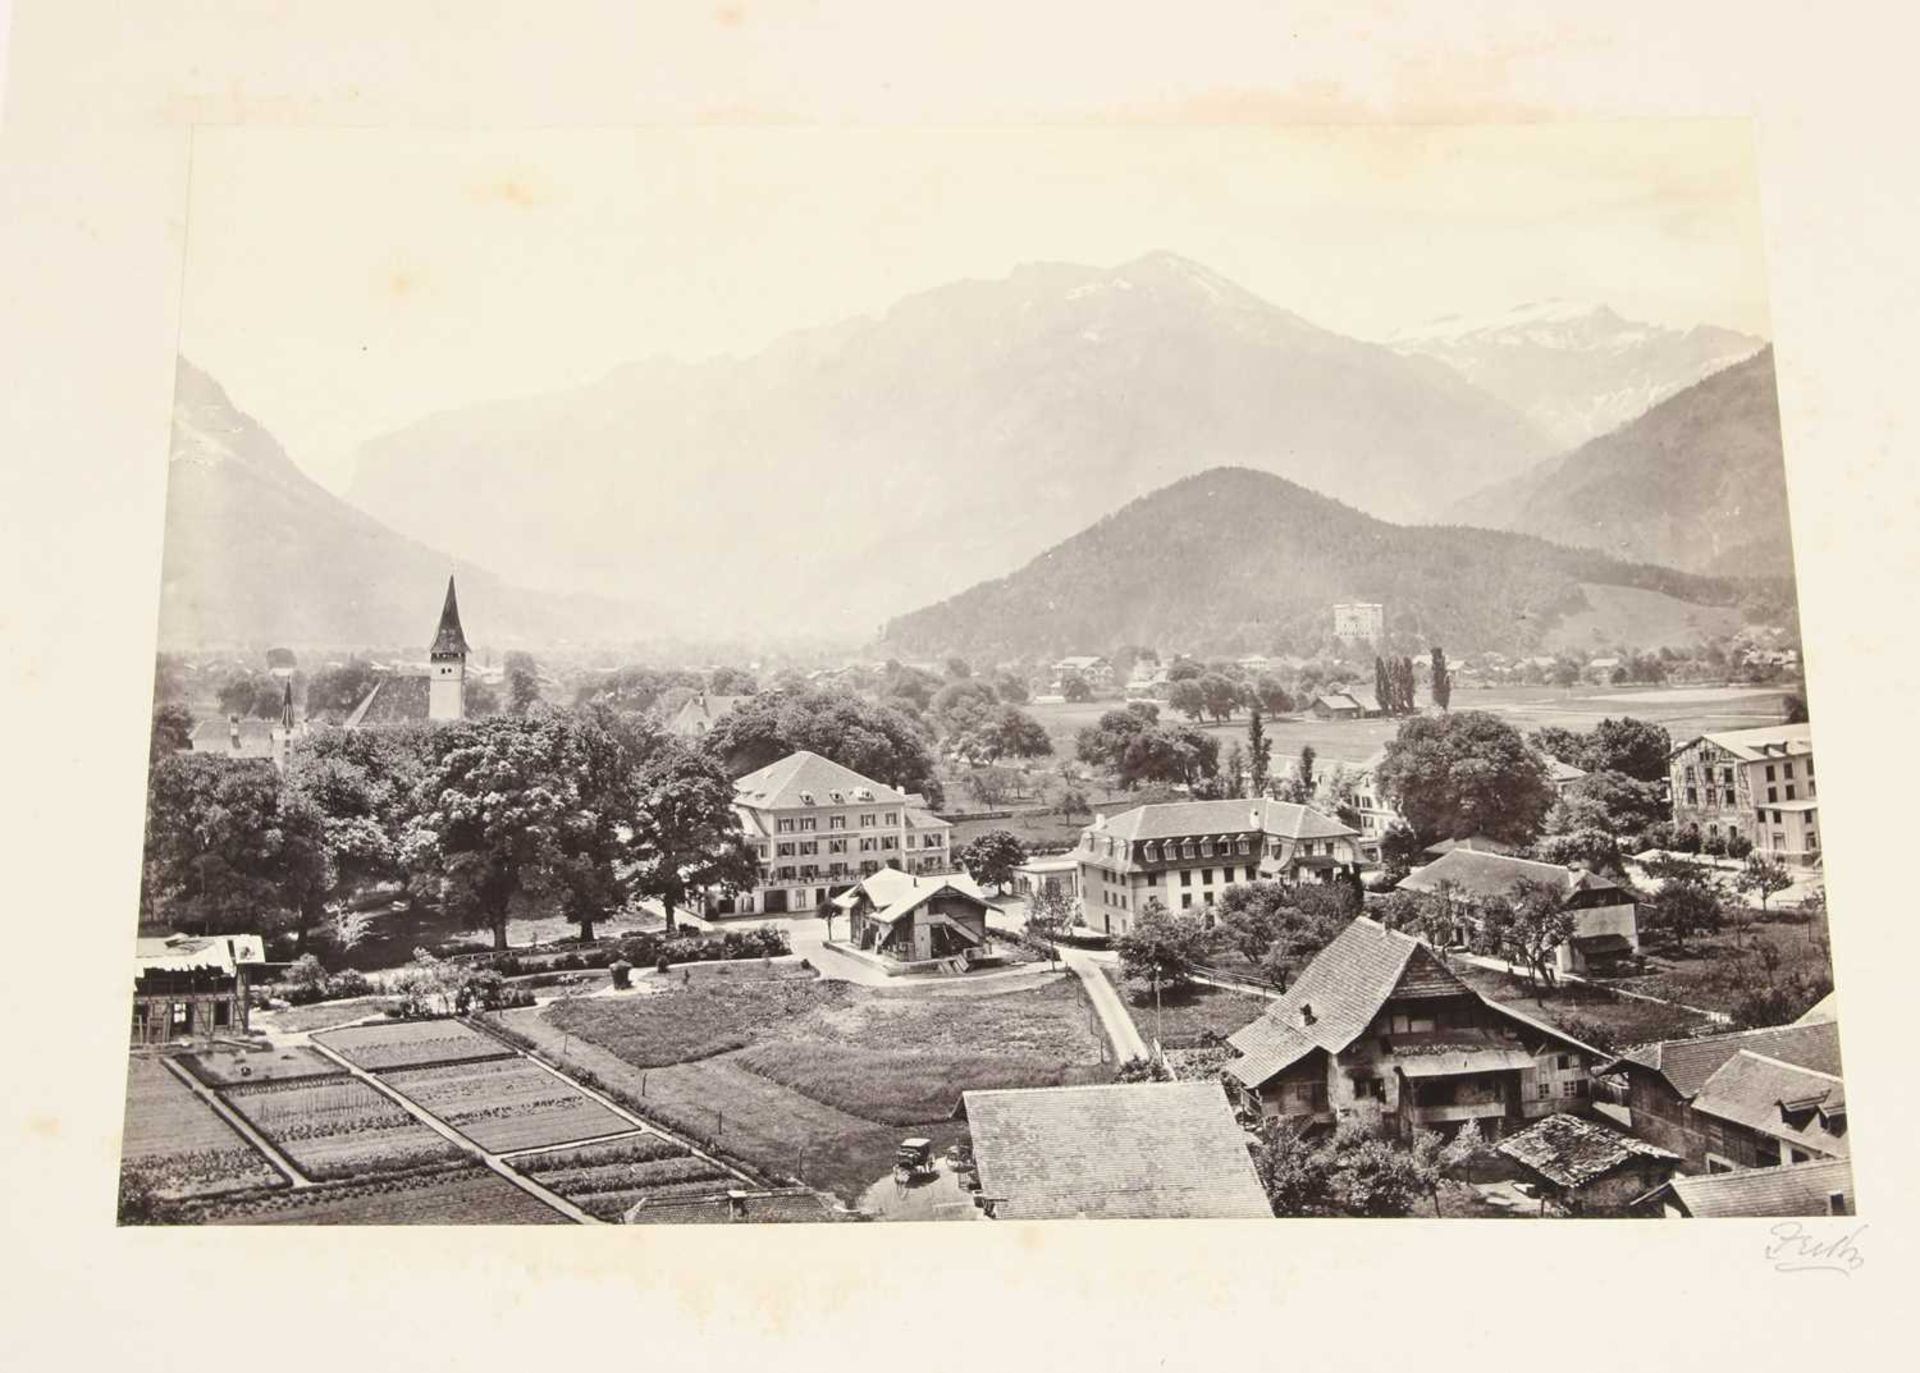 Francis Frith (1822-1898) 'Pictures from Switzerland and the Italian Lakes, photographed by Frith' - Image 6 of 10